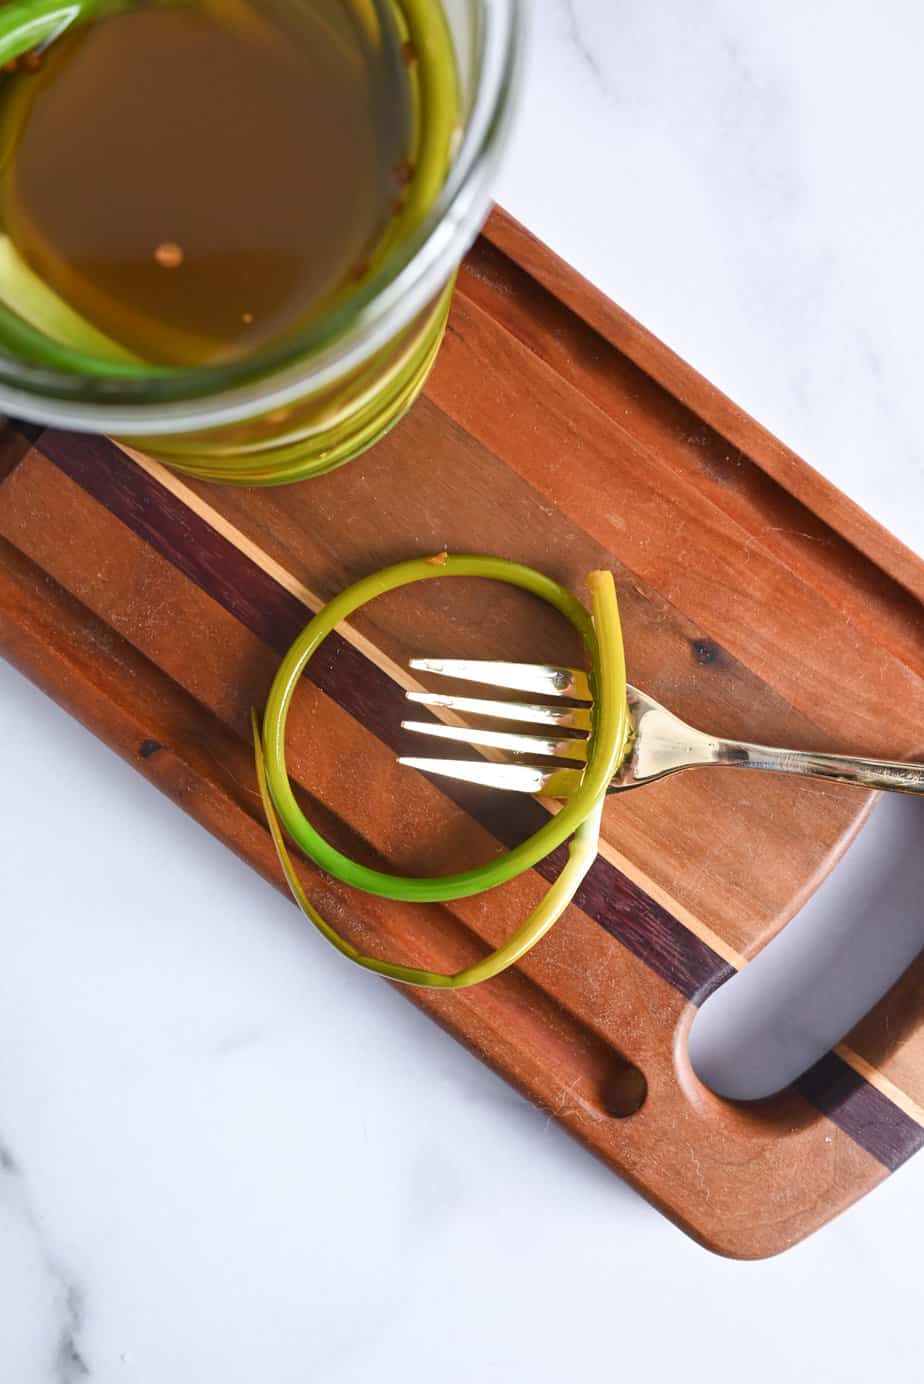 Pickled garlic scape on a fork set on a wooden cutting board.